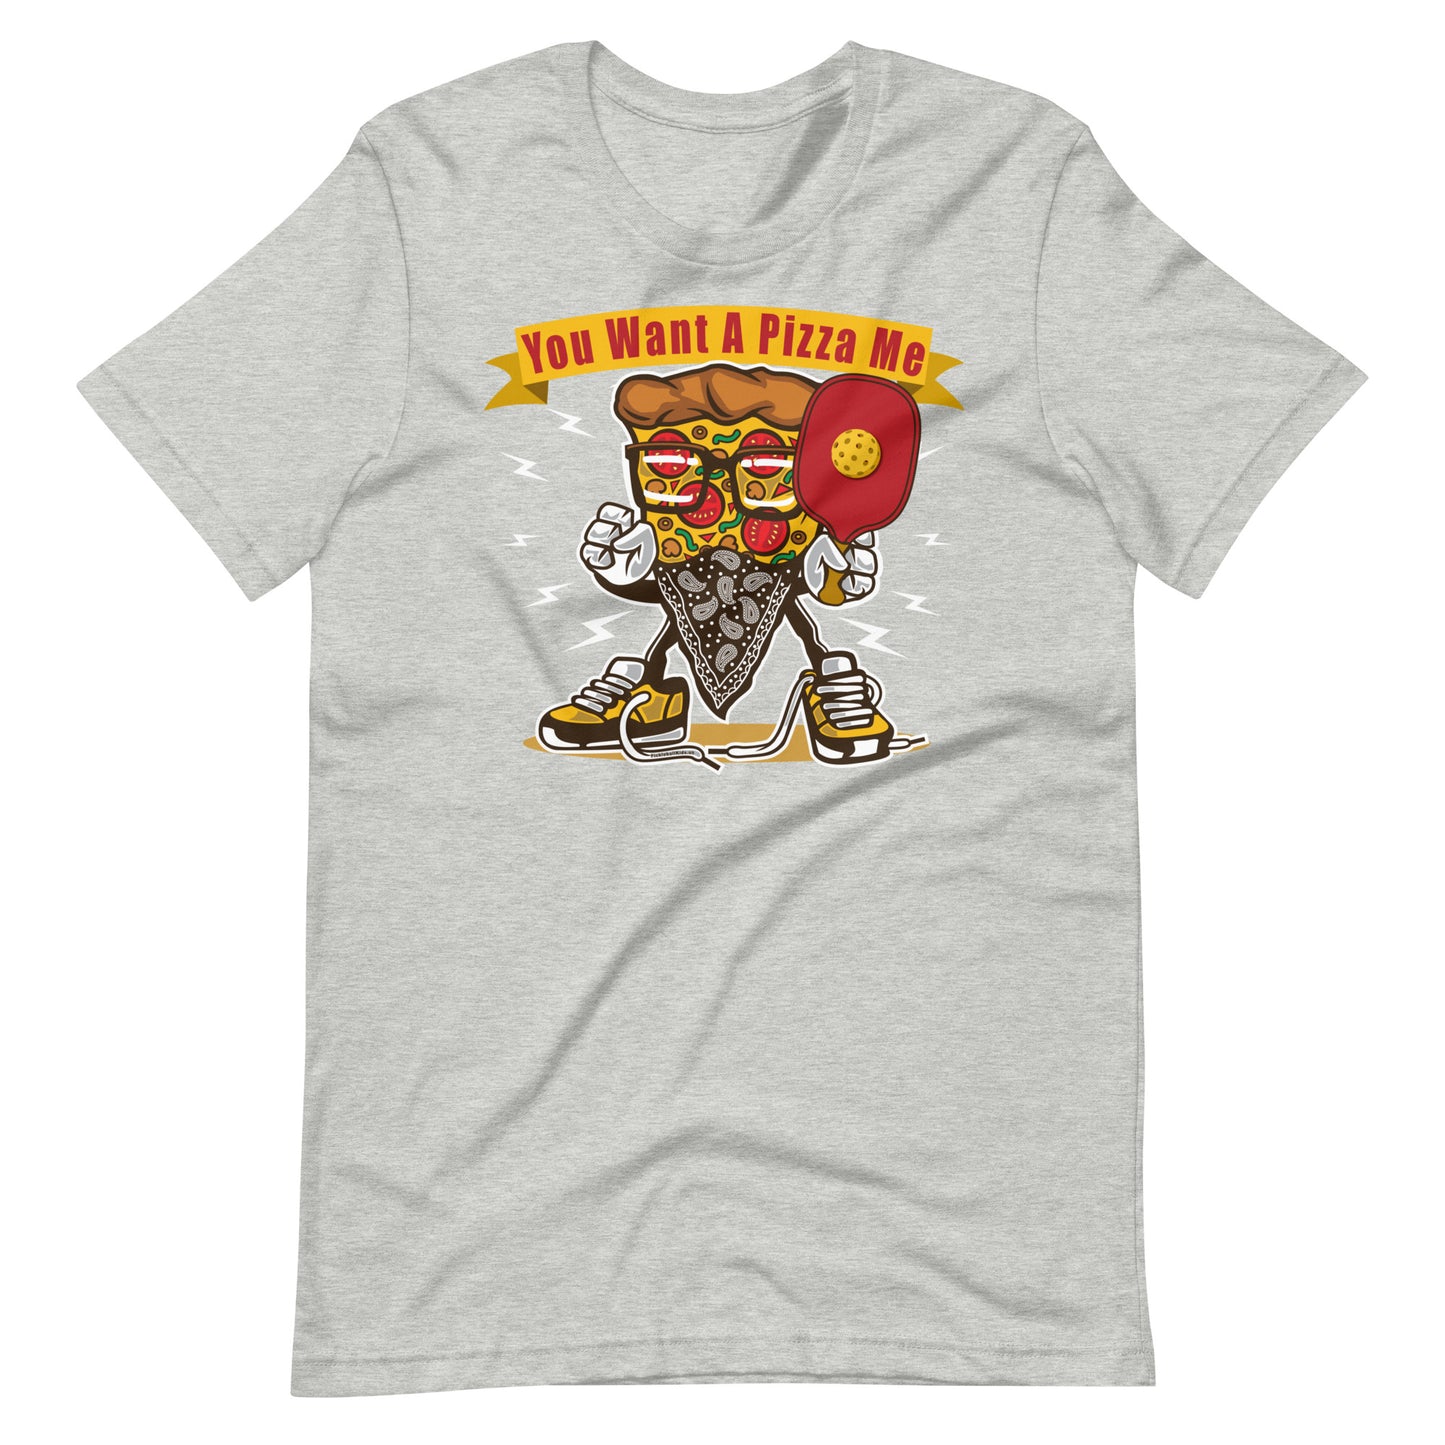 Retro-Vintage Fun Pickleball "You Want A Pizza Of Me" Unisex T-Shirt